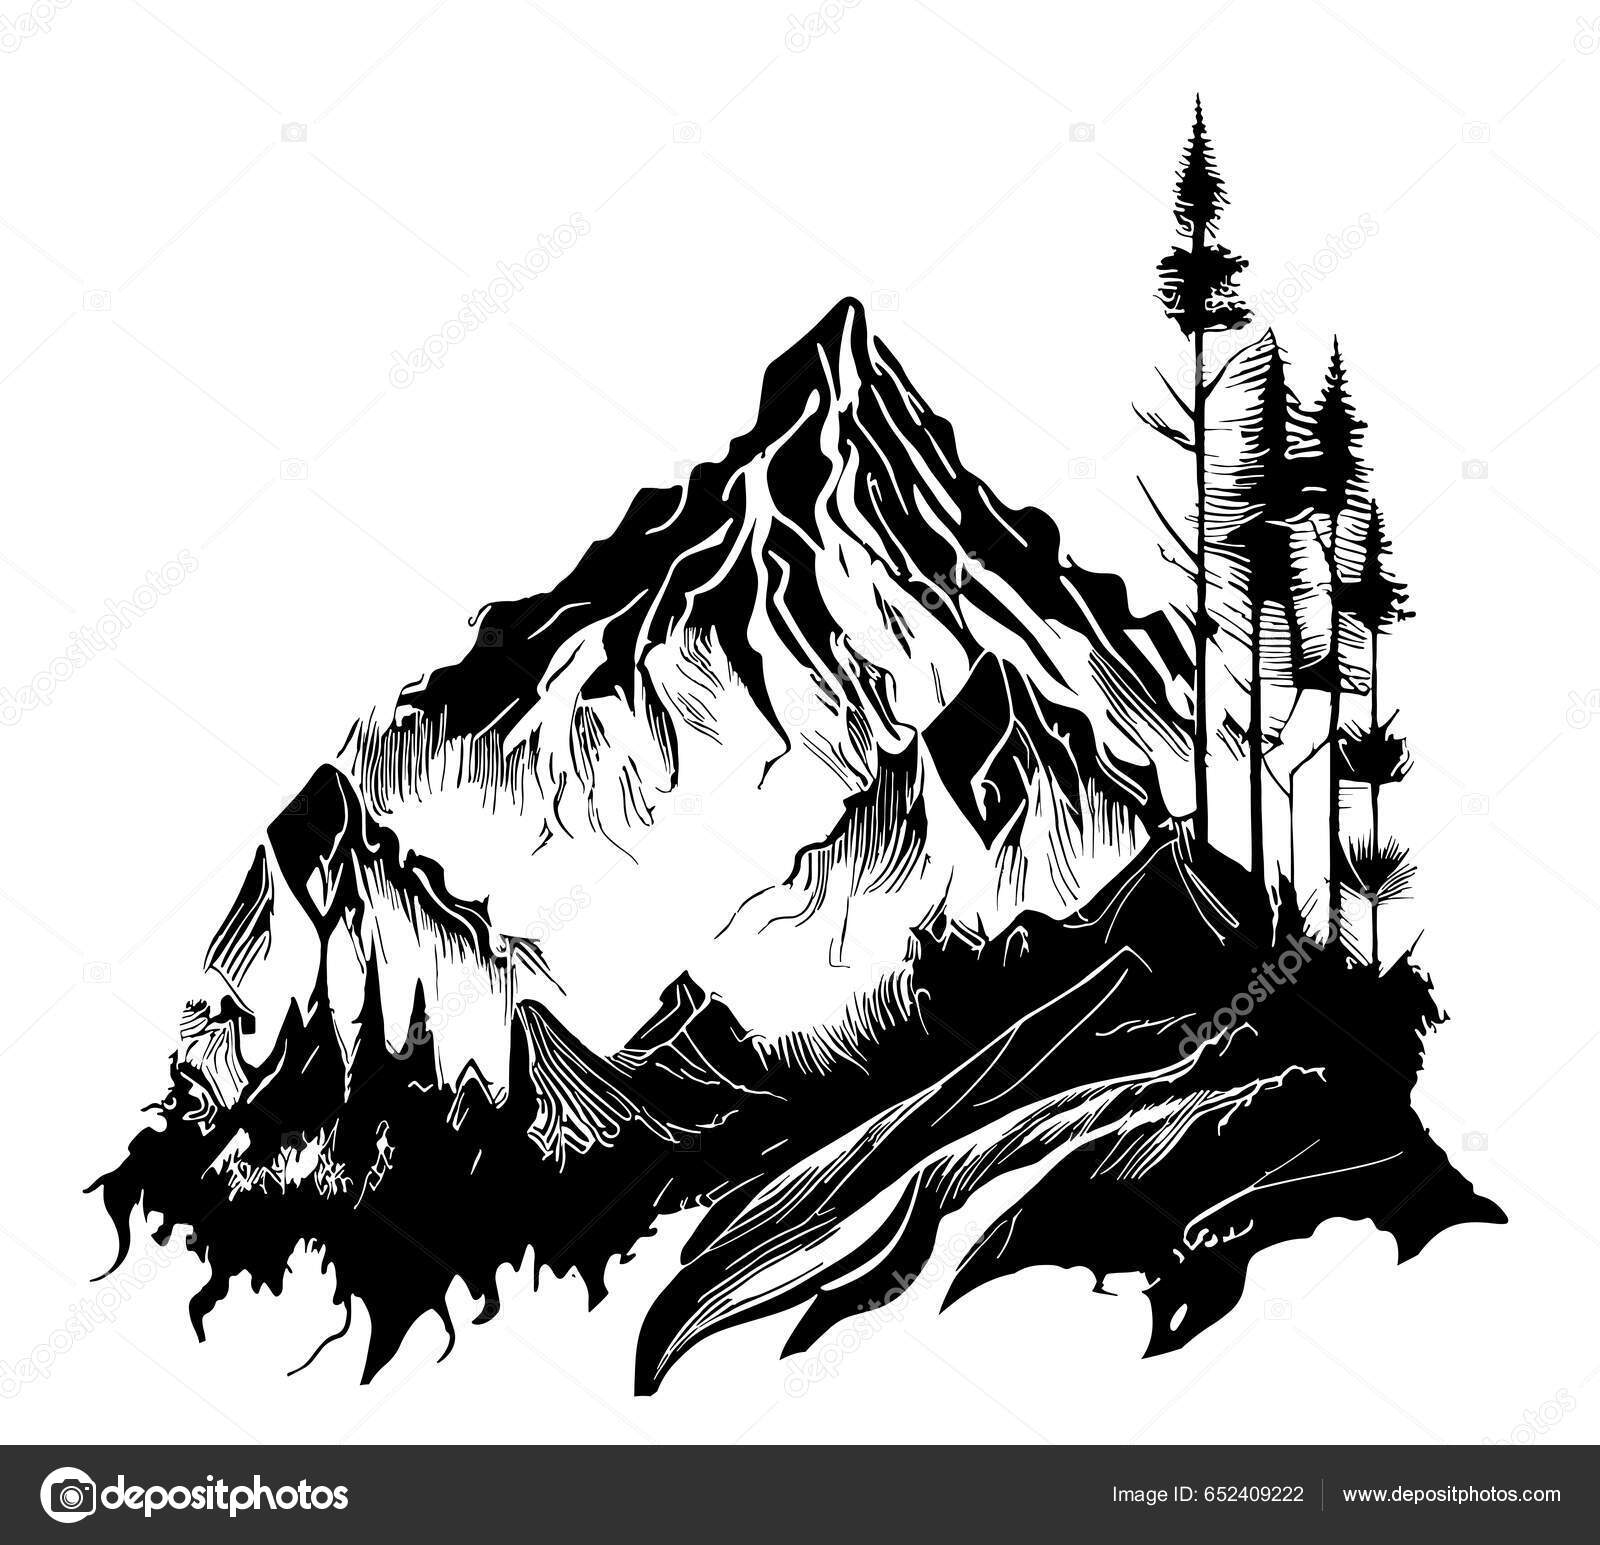 Mountains silhouette clip art Black and White Stock Photos & Images - Alamy